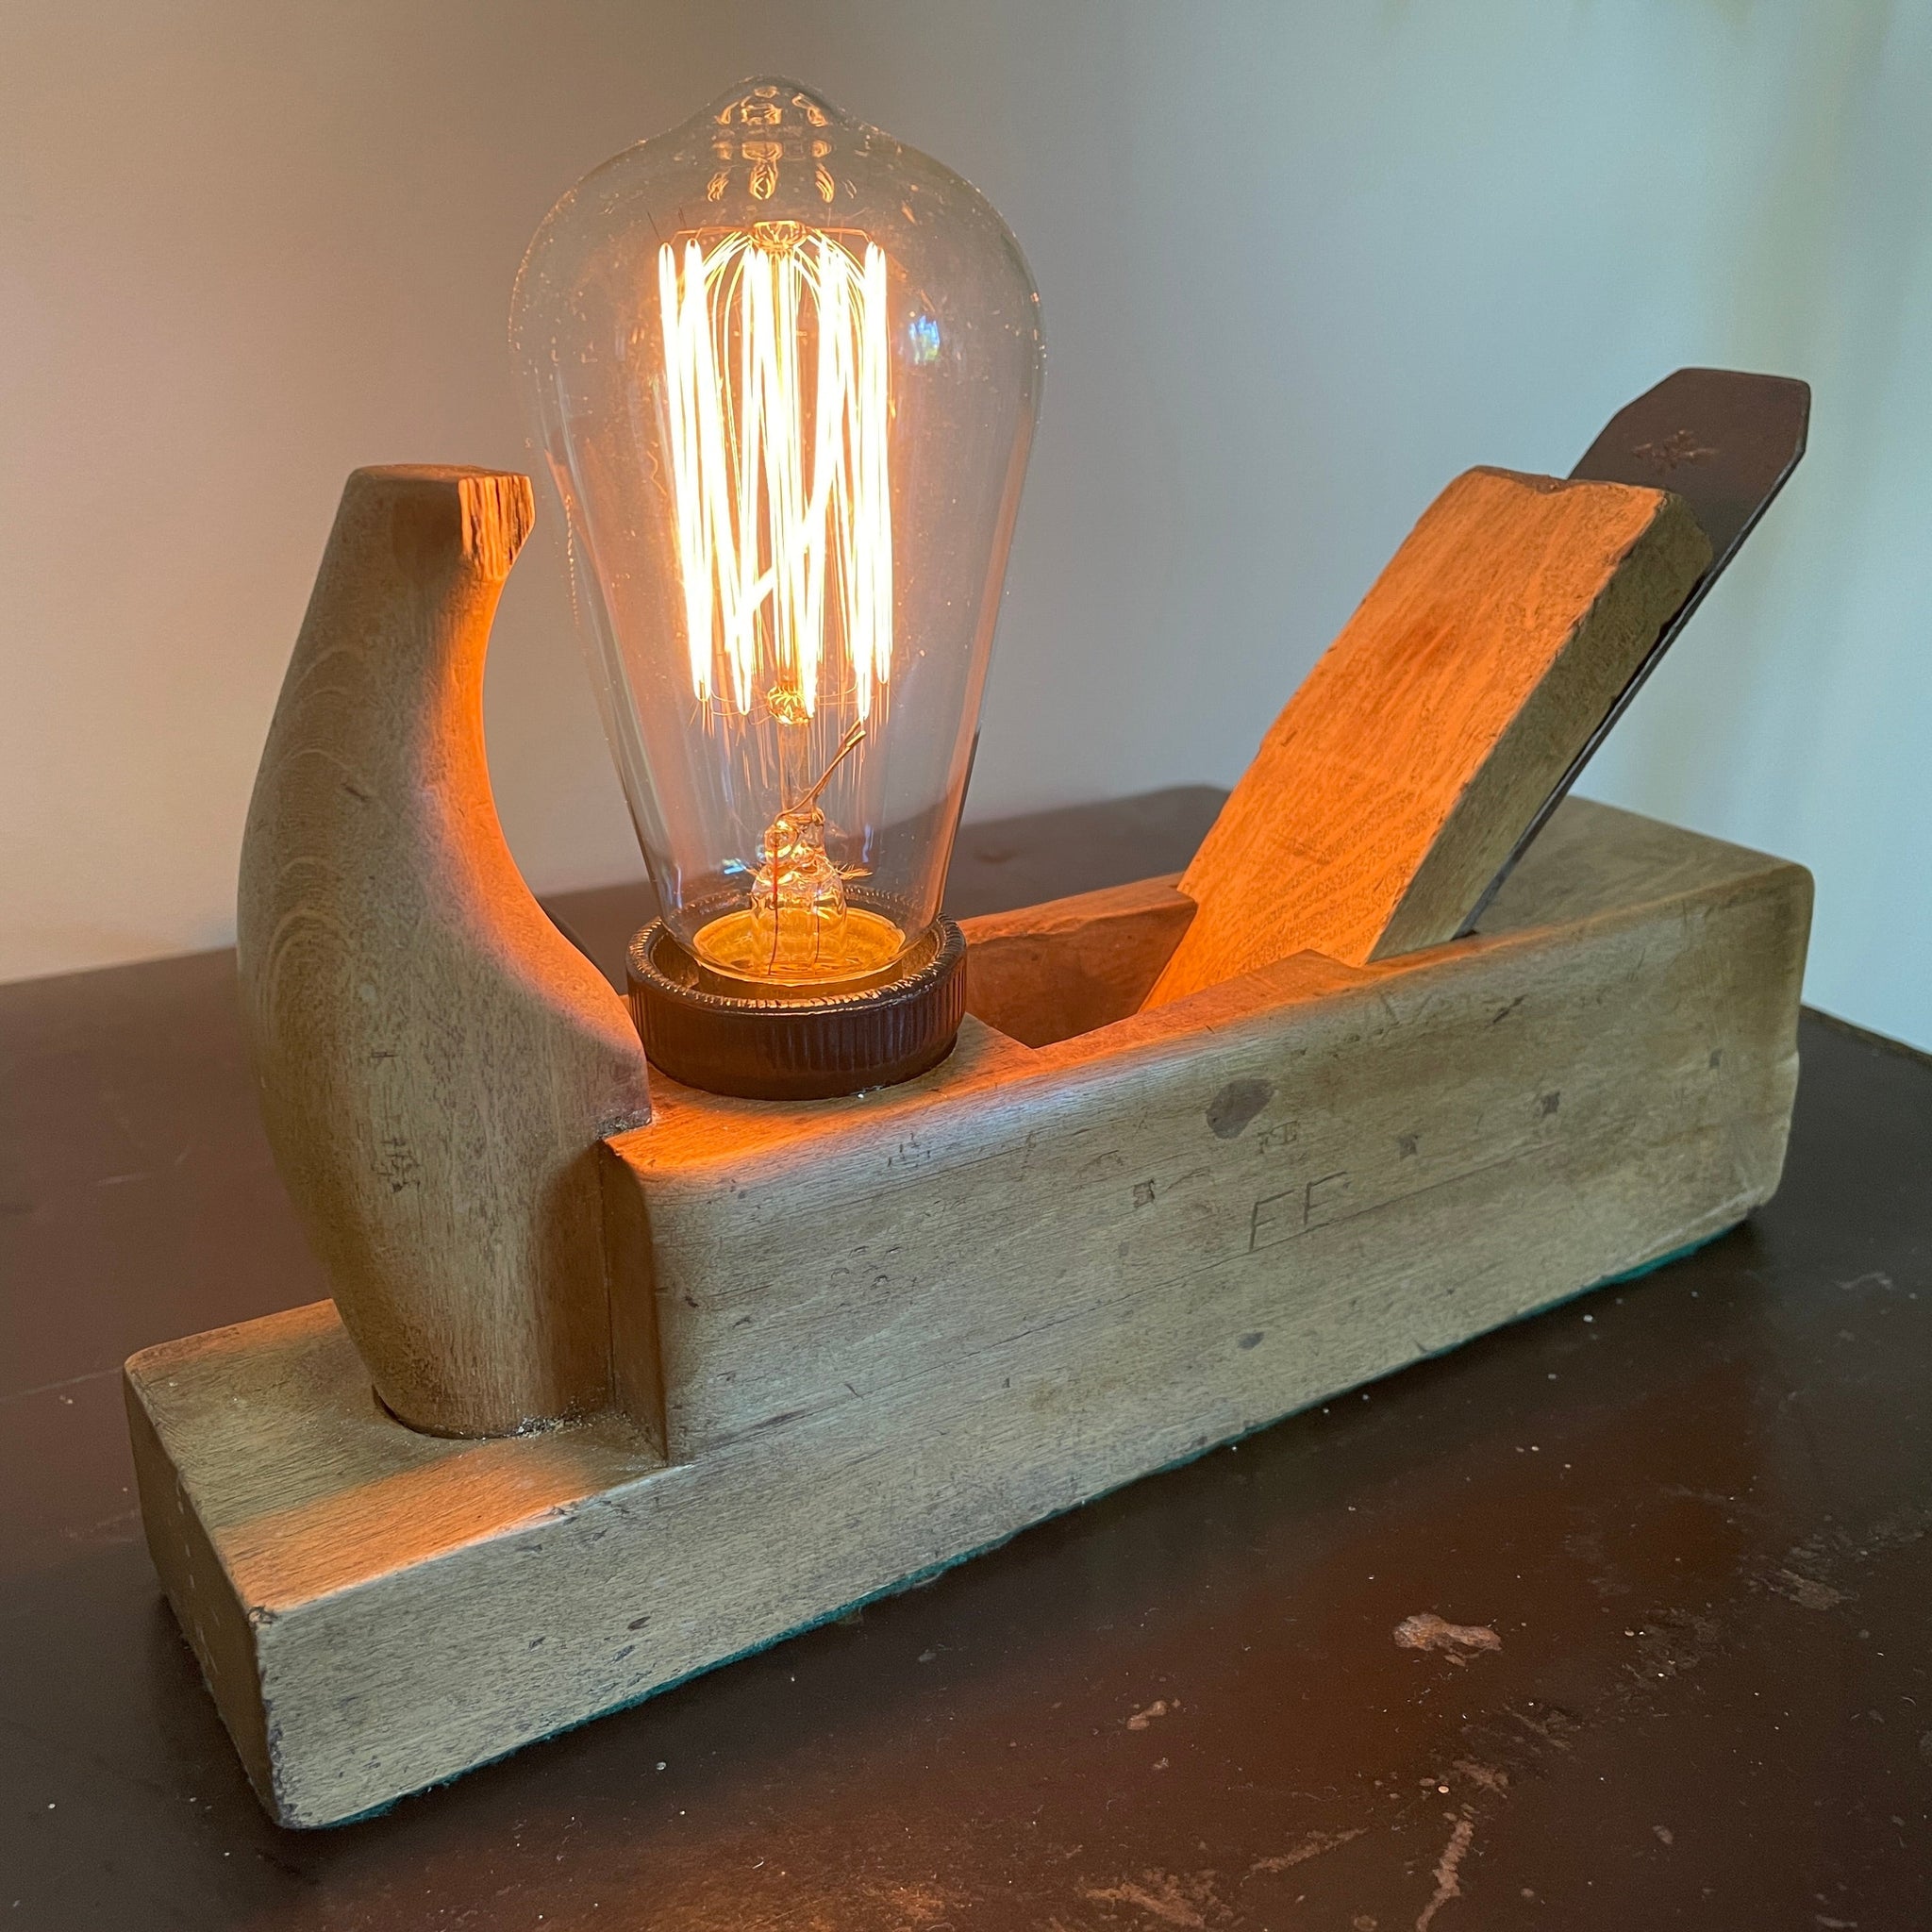 Shades at Grays Edison Lamp Edison Table Lamp - Wood plane series #20 handcrafted lighting made in new zealand